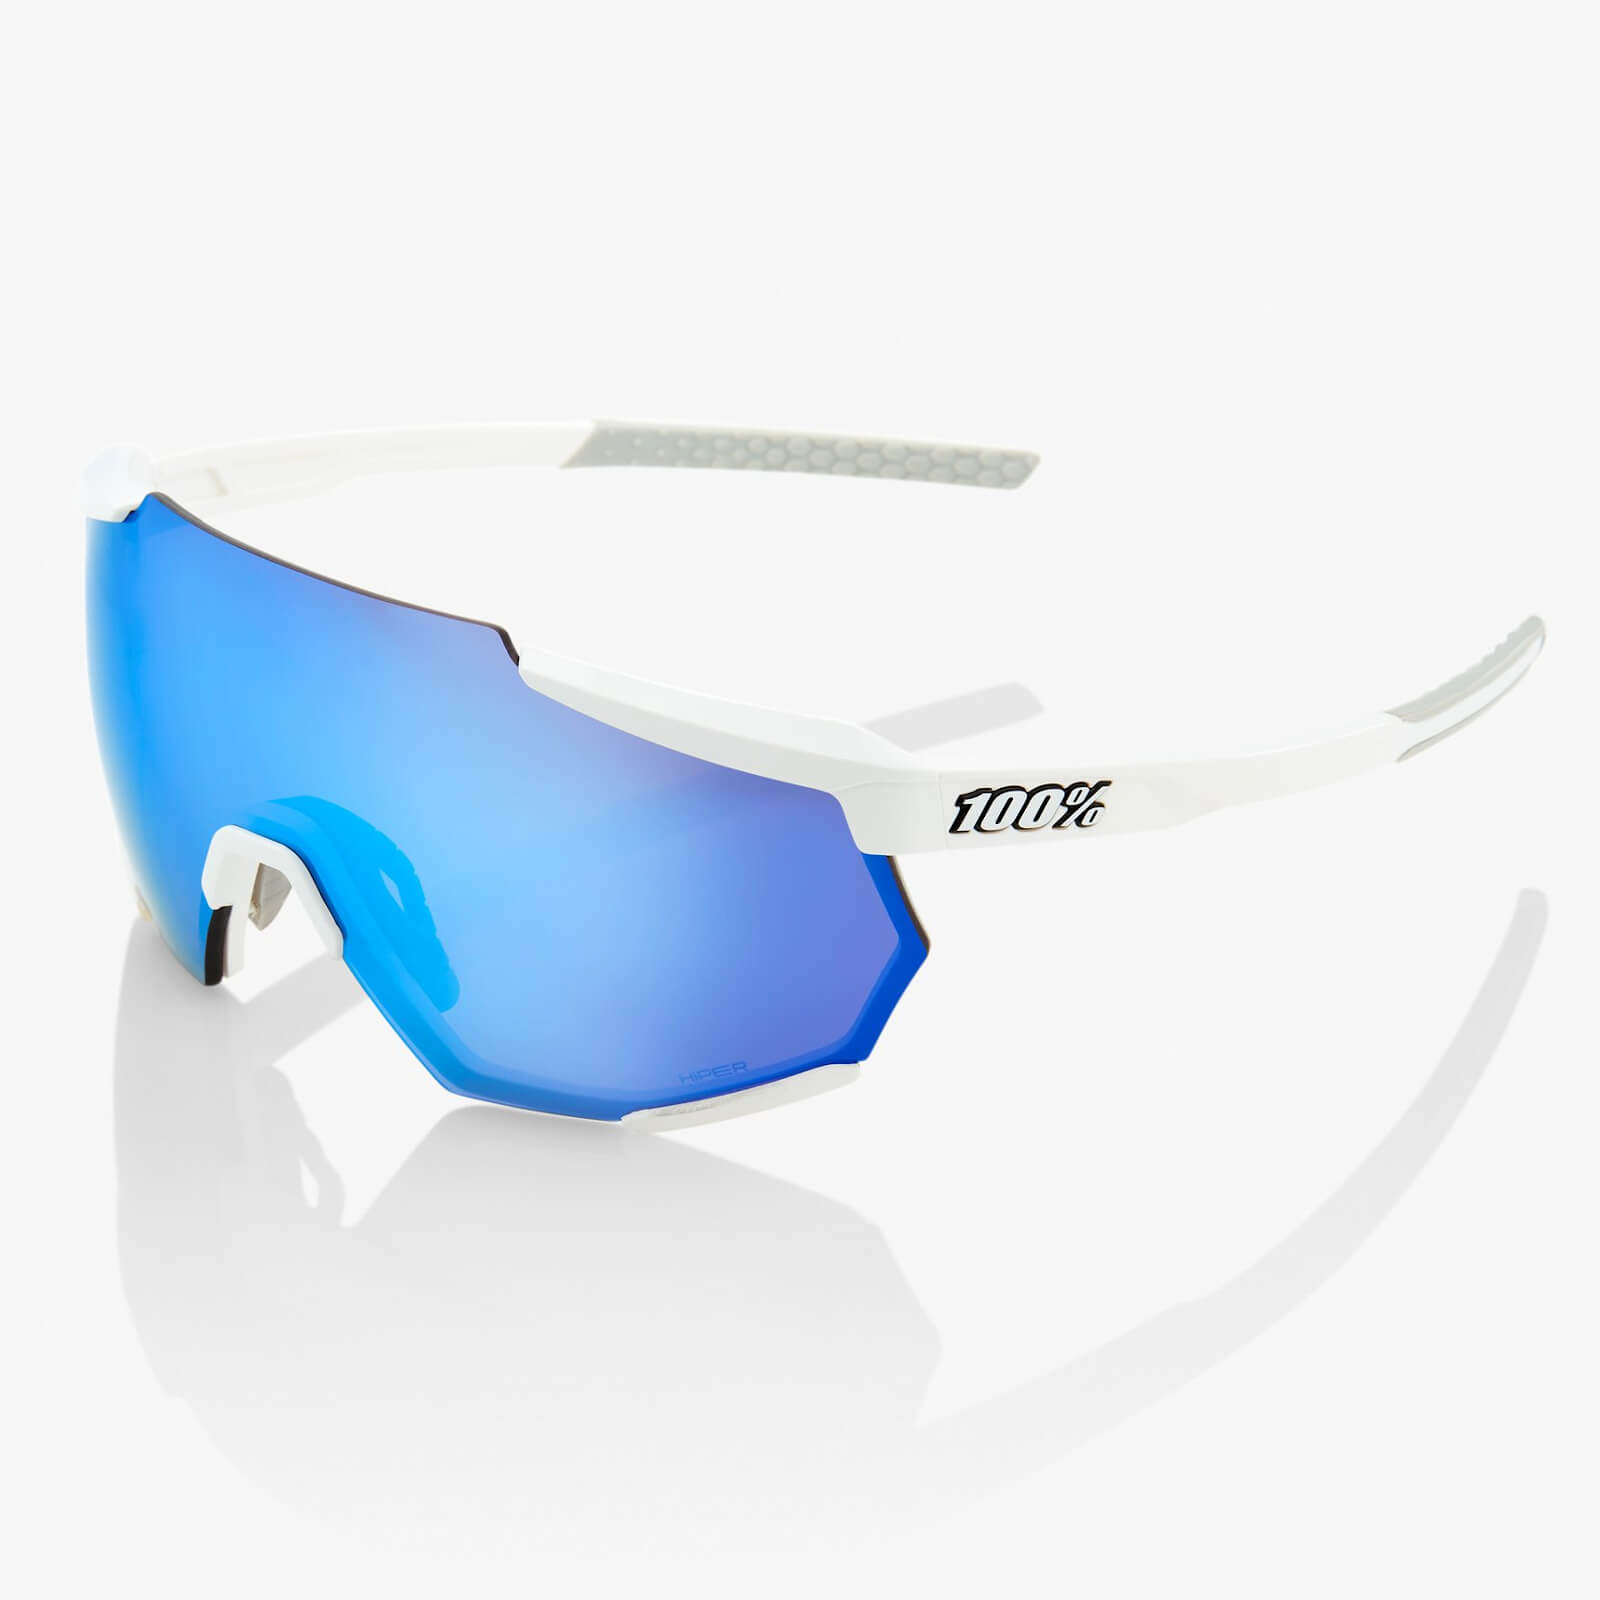 100% Racetrap Sunglasses with HiPER Multiplayer Mirror Lens - Blue Lens